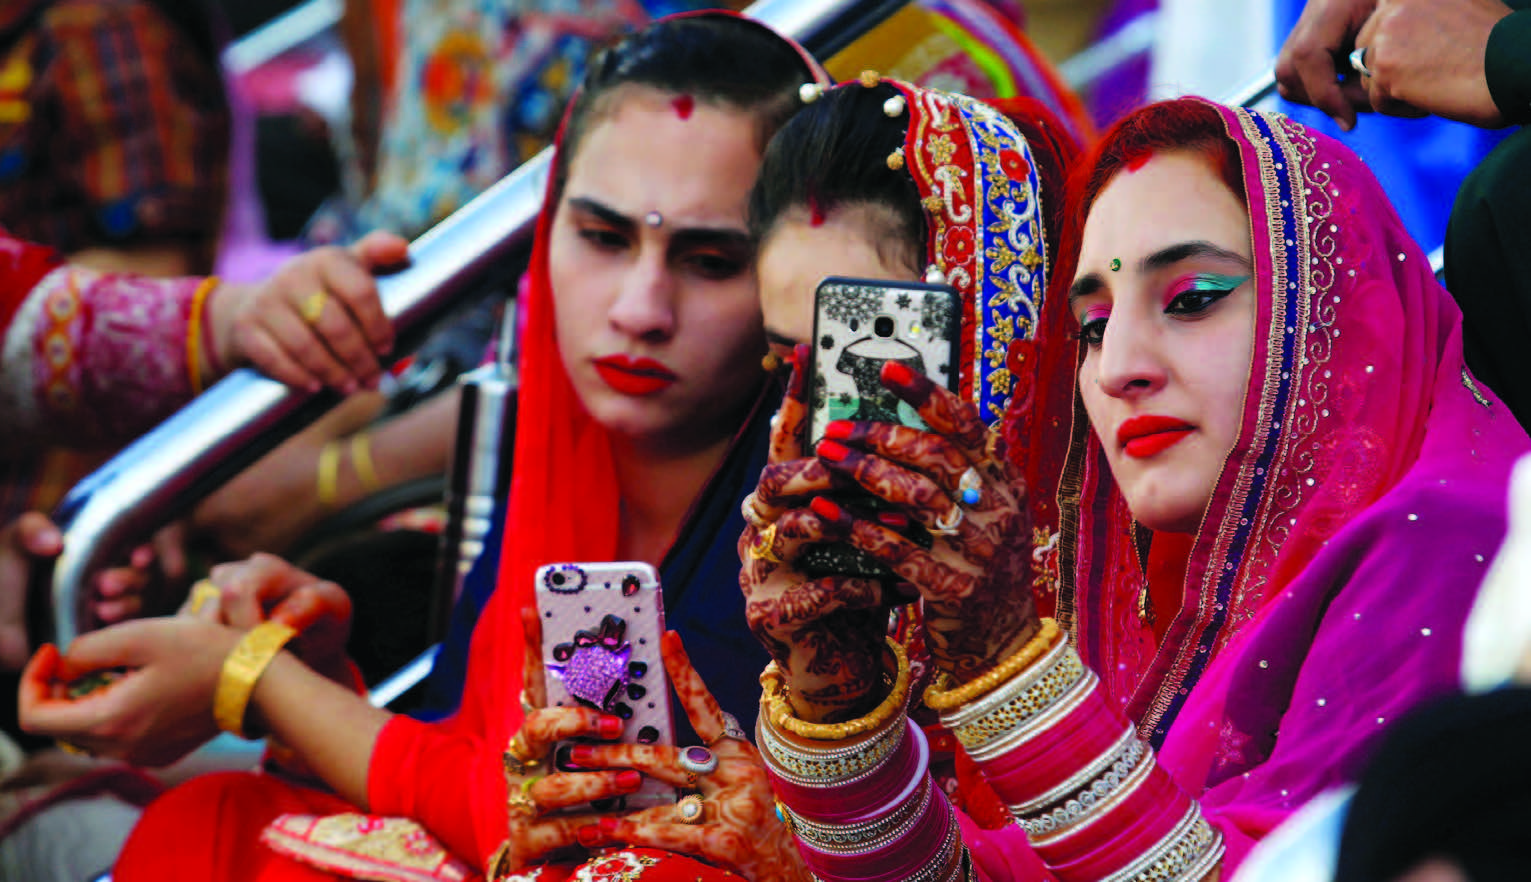 Sikh devotees taking a selfie during the Baisakhi festival at the holy temple of Panja Sahib in Hassan Abdal, Pakistan April 14, 2017. Photo: REUTERS